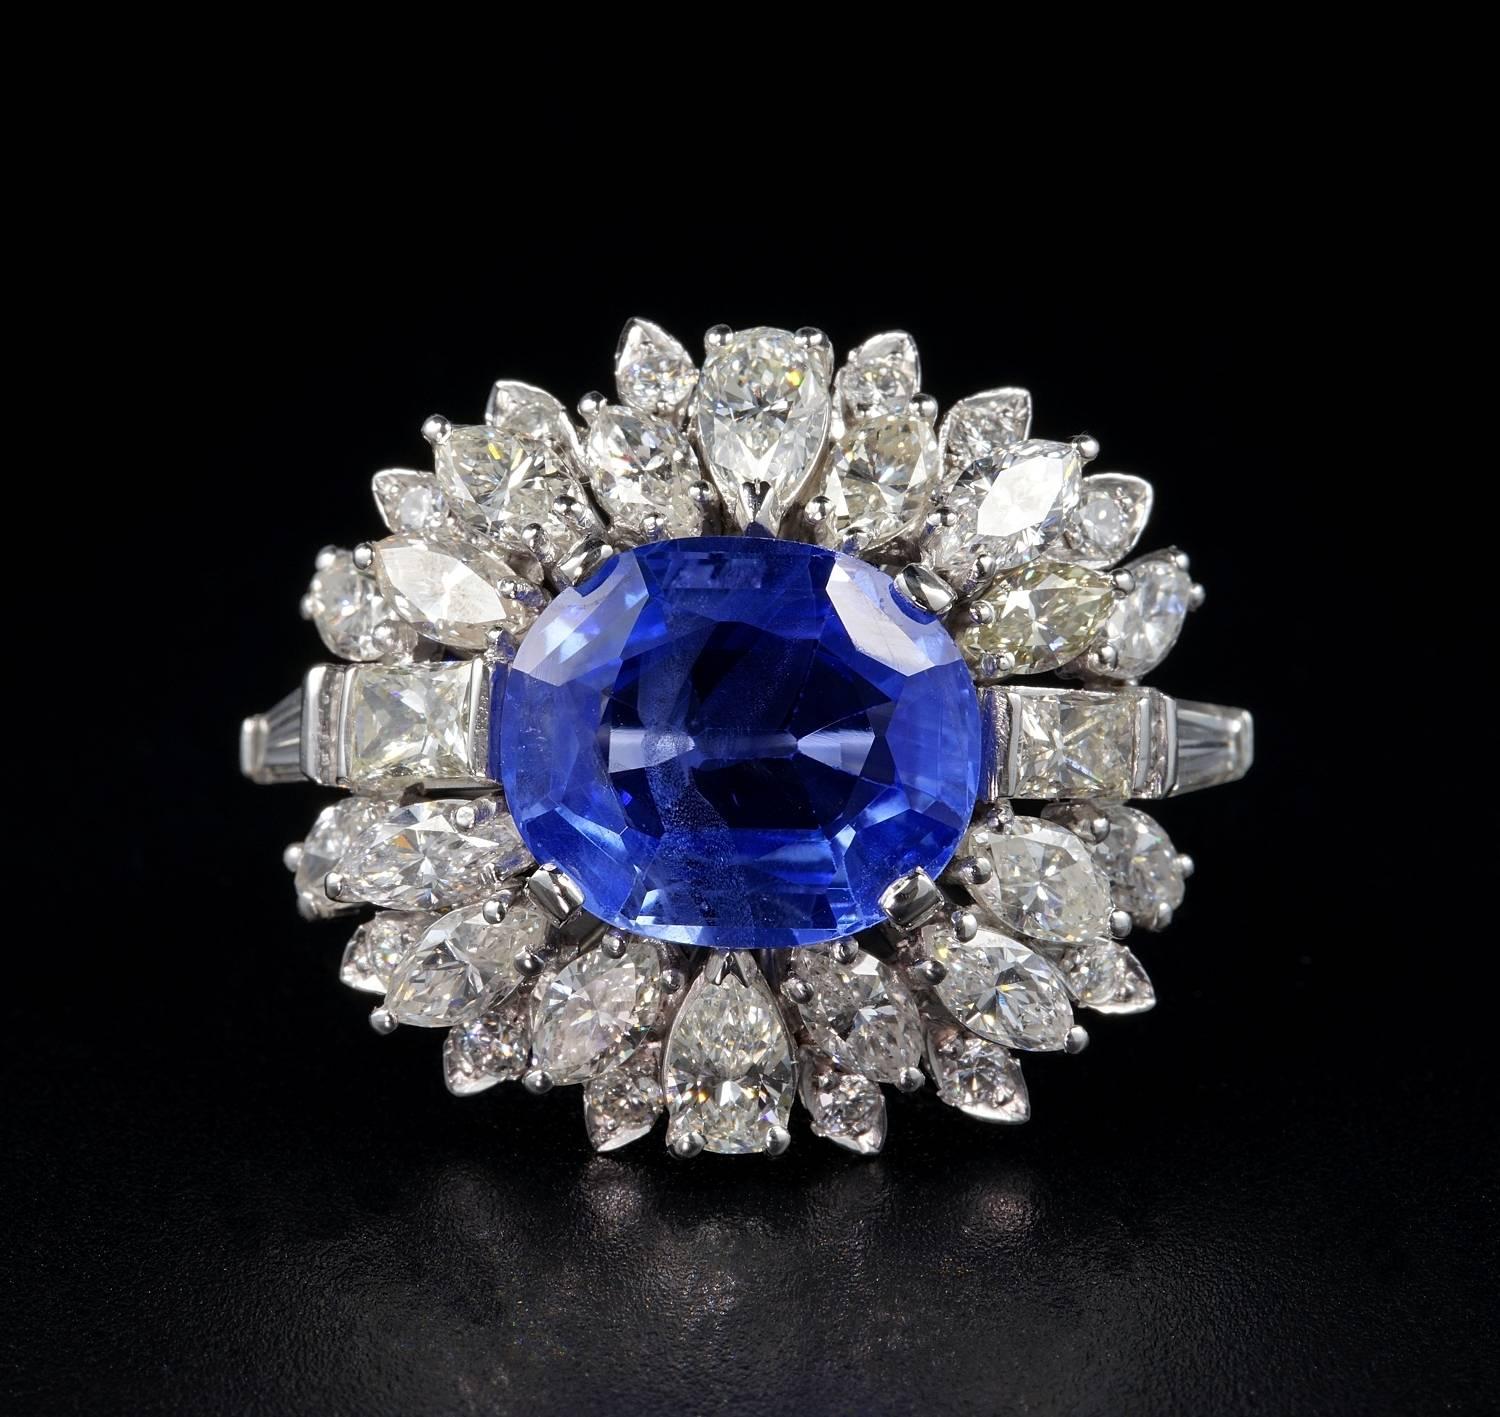 An impressive Diamond and sapphire cocktail ring.
Large crown beautifully designed and hand crafted during the 60's.
Platinum skilfully hand made. Italian origin.
Boasting a magnificent 7.46 Ct Natural no heat Sapphire Ceylon origin - fully